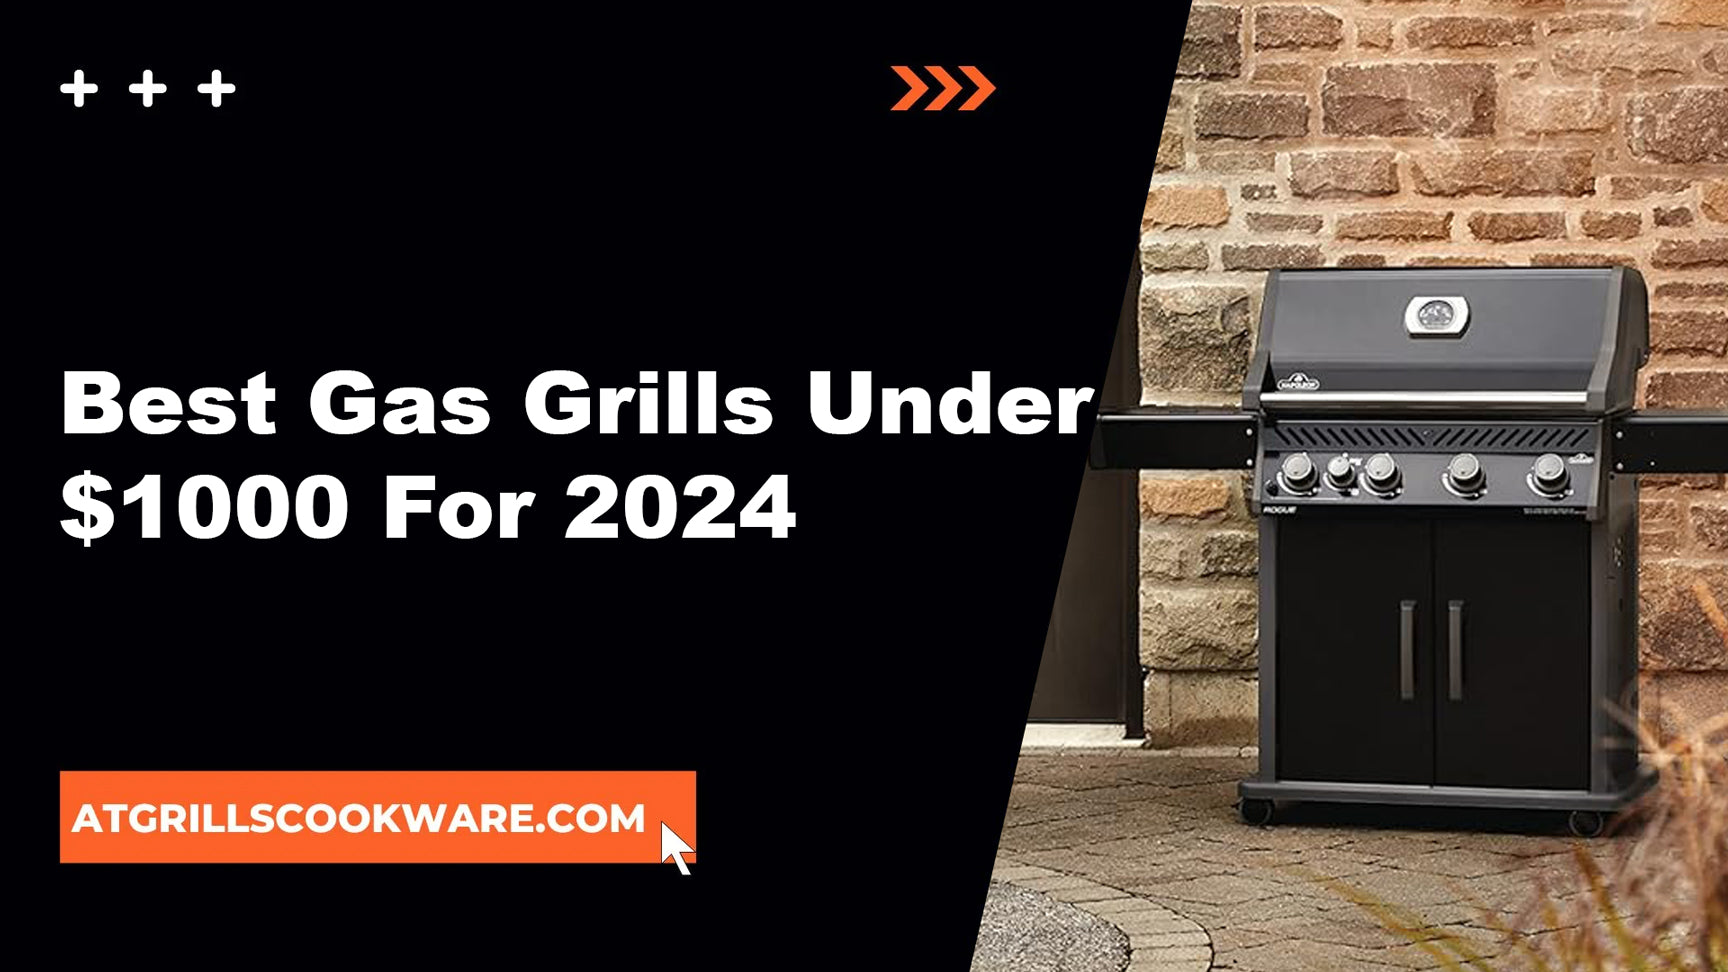 The Best Gas Grills Under $1000 For 2024